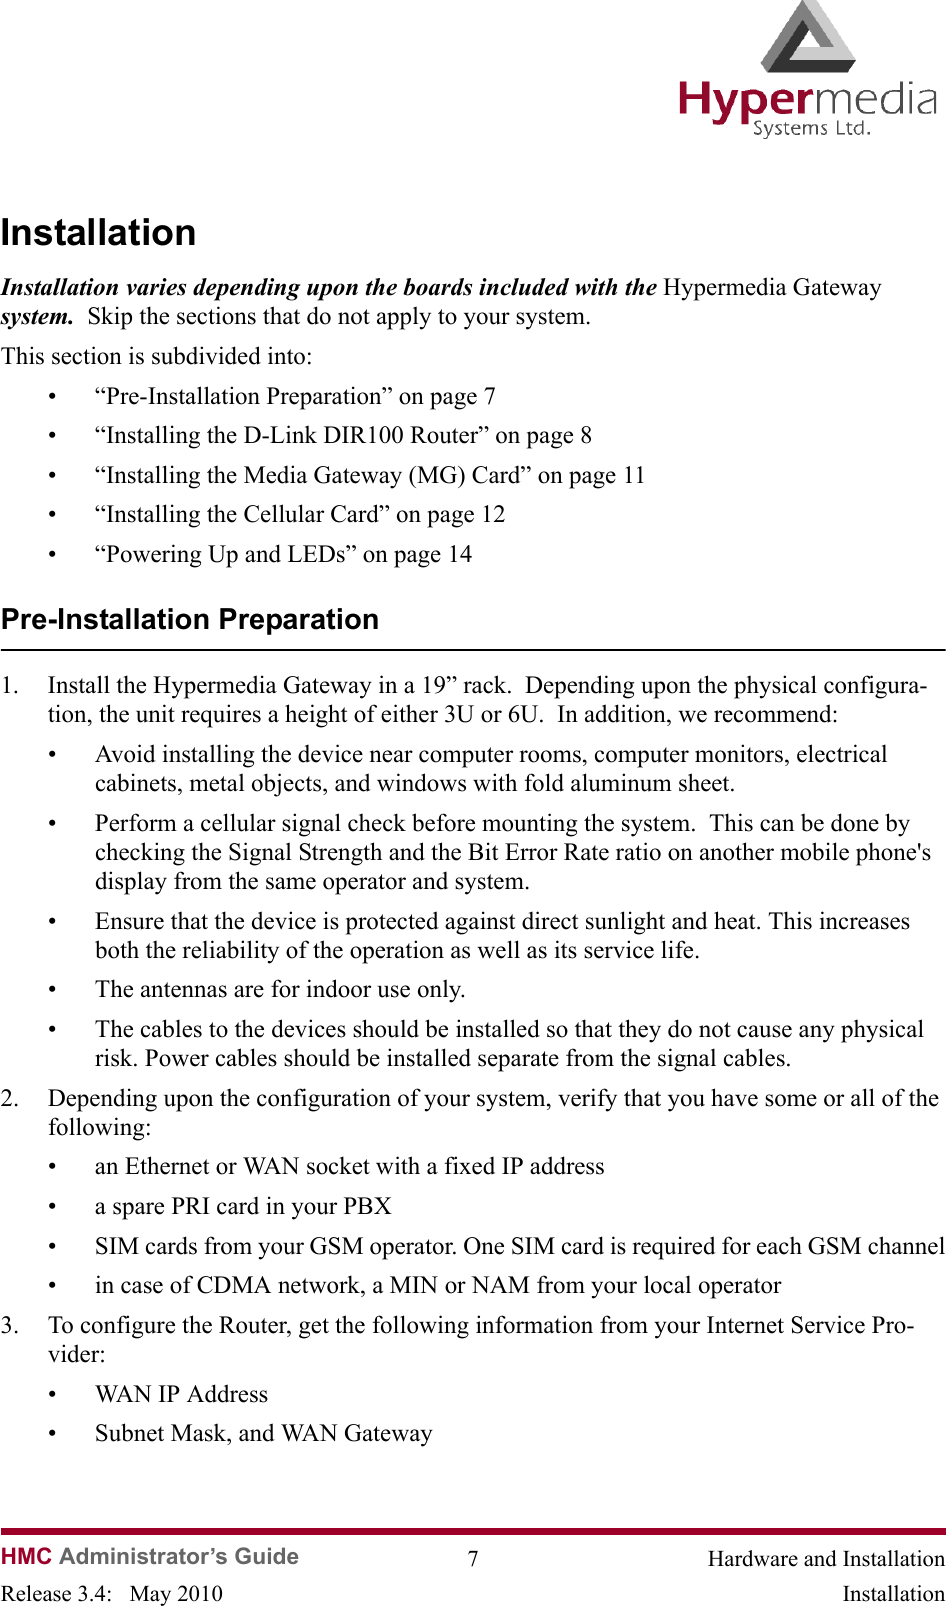 HMC Administrator’s Guide 7 Hardware and InstallationRelease 3.4:   May 2010 InstallationInstallation Installation varies depending upon the boards included with the Hypermedia Gateway system.  Skip the sections that do not apply to your system.This section is subdivided into:• “Pre-Installation Preparation” on page 7• “Installing the D-Link DIR100 Router” on page 8• “Installing the Media Gateway (MG) Card” on page 11• “Installing the Cellular Card” on page 12• “Powering Up and LEDs” on page 14Pre-Installation Preparation1. Install the Hypermedia Gateway in a 19” rack.  Depending upon the physical configura-tion, the unit requires a height of either 3U or 6U.  In addition, we recommend:• Avoid installing the device near computer rooms, computer monitors, electrical cabinets, metal objects, and windows with fold aluminum sheet. • Perform a cellular signal check before mounting the system.  This can be done by checking the Signal Strength and the Bit Error Rate ratio on another mobile phone&apos;s display from the same operator and system.• Ensure that the device is protected against direct sunlight and heat. This increases both the reliability of the operation as well as its service life.• The antennas are for indoor use only.• The cables to the devices should be installed so that they do not cause any physical risk. Power cables should be installed separate from the signal cables.2. Depending upon the configuration of your system, verify that you have some or all of the following:• an Ethernet or WAN socket with a fixed IP address• a spare PRI card in your PBX• SIM cards from your GSM operator. One SIM card is required for each GSM channel• in case of CDMA network, a MIN or NAM from your local operator3. To configure the Router, get the following information from your Internet Service Pro-vider:• WAN IP Address• Subnet Mask, and WAN Gateway